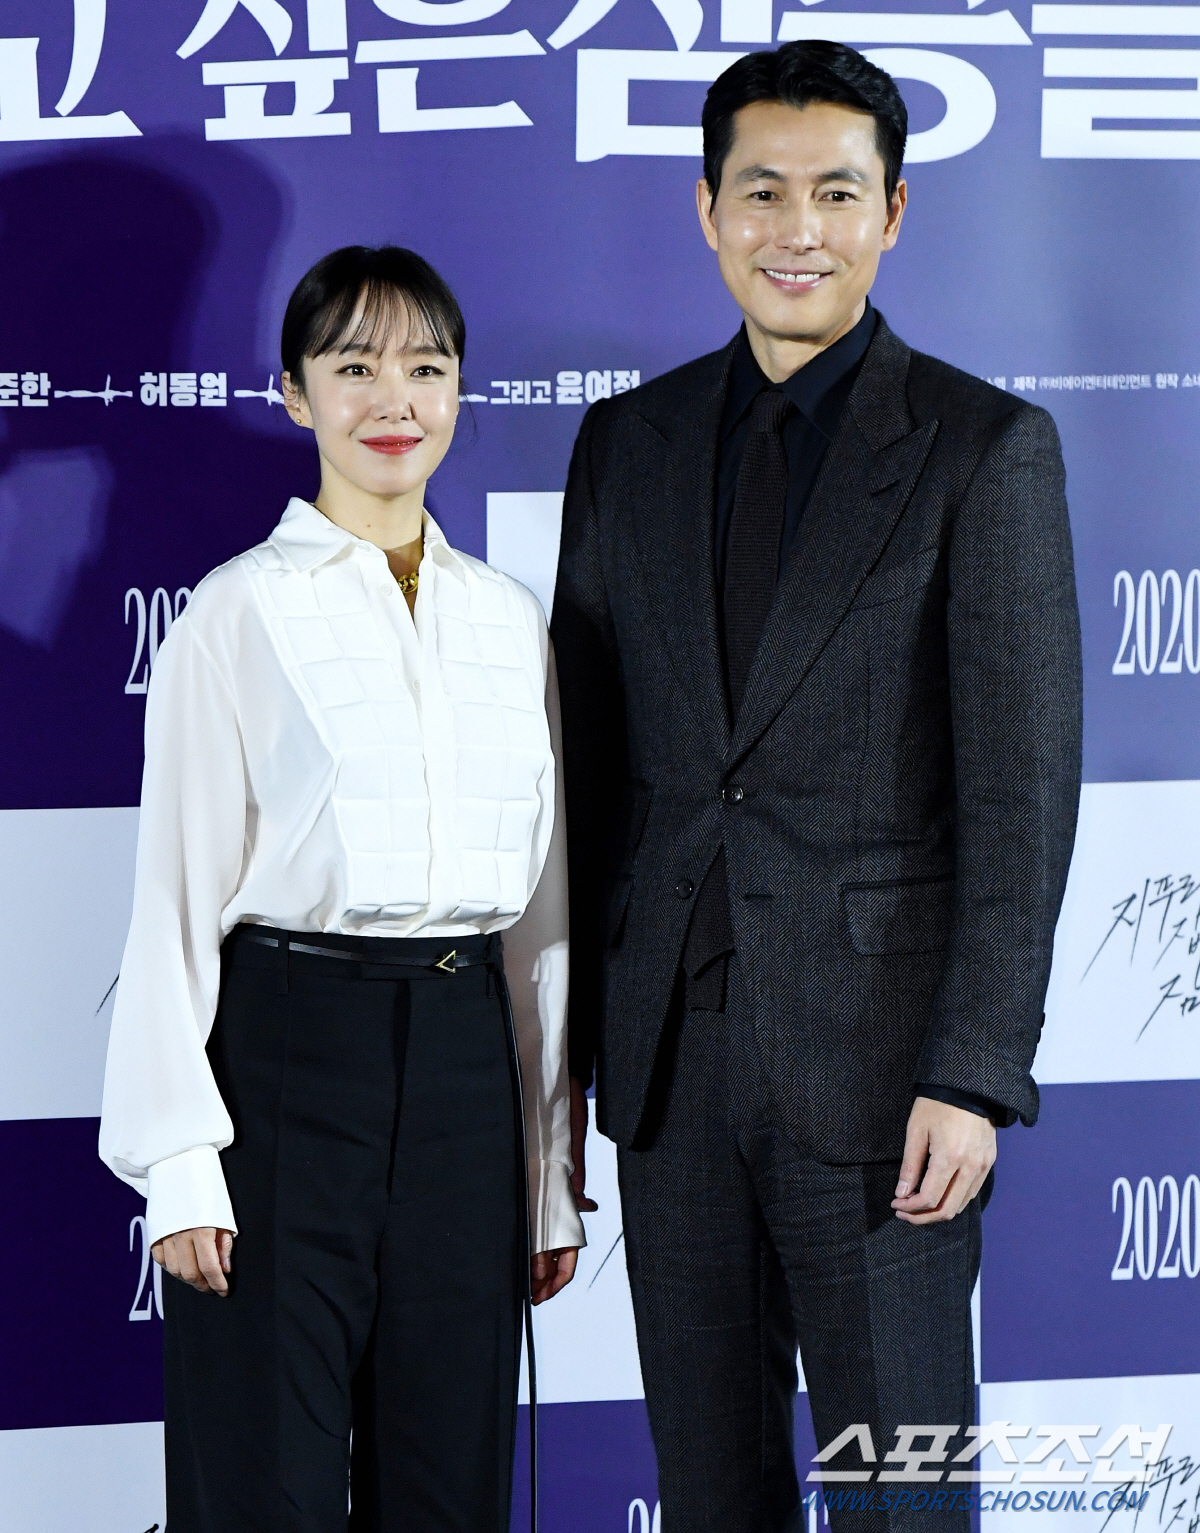 Chungmuro Acting Genius and Passion Beasts united through the crime thriller The Beasts Who Want to Grab a Jeep (directed by Kim Yong-hoon, produced by BA Entertainment and Megabox Central PlusM).In particular, Actor Jeon Do-yeon and Jung Woo-sung, who are considered to be the best actors in Chungmuro, are expecting to be the first co-work since debut.The beasts who want to catch even the straw is a work that depicts the stories of ordinary humans planning the worst of the worst to take the money bag, the last chance of life.The animals who want to catch the straw, which is a film about the same name by Sonne Kasuke, took off the veil through the production report of Beasts who want to catch the straw held at Megabox Seongsu in Wangsimniro 50, Seongdong-gu, Seoul on the 13th.The worst Choices and the result of the most ordinary human beings, such as the shaky head, the civil servant, the housewife whose family collapsed, to escape the desperate situation. The characters in the movie were all caught in the corner because of the inevitable situation, and the theme consciousness that human nature is not evil.Based on this dense story, the animals who want to catch a straw, which boasts a new and unique composition and a restless development, is more than anything else called Chungmuro All-Star Game.Jung Woo-sung, Actor Youn Yuh-jung, Chungmuro Blue Chip Shin Hyun-bin and Jungaram, who won the 40th Blue Dragon Film Awards Academy Awards in November last year, led the Queen of Cannes Jeon Do-yeon.Among them, the point of observation is Jeon Do-yeon, who does not mind the transformation of each work.In The Animals Who Want to Hold a Jew, Jeon Do-yeon transformed into Michelle Chen, a bar president who dreams of a completely new life away from the dark past.Before that, a large amount of money appeared to be able to liquidate everything and live a new life.A character who lives solely for himself uses the vain hope of those who are in despair to make a big edition of crime.Jeon Do-yeon, who opened the screen in 2020 as a former-class Sen Character, said: I was offered a Character who draws a big picture to take the money bag.Once the scenario was fun, it could be an obvious genre, but the dramatic scene was really fresh.So I became Choices. He also said why he chose the work. He also said about the character he had Acted, Michelle Chen Character had a strong feeling.So I tried to make it as hard as possible and naturally act.There are two images of Michelle Chen, who Taeyoung knows, and Michelle Chen, who Taeyoung does not know.Michelle Chen, who Taeyoung knows, is very lovely, but now I am a little ashamed. Jung Woo-sung, who predicted the birth of a new character in Beasts who want to catch straw as well as Jeon Do-yeon, also raises expectations.Jung Woo-sung, in the play, Acted Taeyoung, a port park that planned the last tang because of his lover who disappeared leaving a huge debt in his future.While he was living an uneasy life with all kinds of threats from the loan shark with the debt and interest left by his lover, he will show off his charm as a changing person with a large amount of money that can change his life before him.Jung Woo-sung said: The character I Act is a hero; a dog when it is buried, and a human who does not know what it is buried.I am a puppy when I am buried, but I do not know my own situation and I try to control everything by knowing that I am a lion of the jungle.I am a human being who can not do bad things, but I have been acting in the illusion that I will get perfect revenge for Michelle Chen who has soaked my feet in bad things and left me. Jung Woo-sung said that even if he tried to cover up with his clothes, his shining appearance was not covered.It is Jung Woo-sung who gave a unique joke to the costume directors sigh that his appearance was not the only trouble.The humor and wit of Jung Woo-sung will also shine in the brutes who want to catch even the straw, which wittyly captures the ironic situation.In addition, Jung Woo-sung is the first work since the 40th Blue Dragon Film Awards, which collected topics last year, and presented The Animals Who Want to Hold a Jeep.Of course, the weight and encouragement of the prize are very important, but it seems to be more important to show a clear act to my colleagues in front of me.I tried to do my best in the animals that want to catch even straw. I hope that such a figure will be reflected well and delivered to the audience. The hard-carrying Jeon Do-yeon, Jung Woo-sungs activities will be included in the brutes who want to catch straw, which is the first co-work since the debut of the two actors.Jeon Do-yeon, who debuted in 1992 as MBC drama Our Heaven and was 28 years old in his acting career this year.And Jung Woo-sung, who entered the 26th year with the 1994 film Gumiho (director Park Hun-soo), was a youth star who led the 90s, but unfortunately, the opportunity to co-work in one work was rarely given.Jeon Do-yeon and Jung Woo-sung, who have been in the first co-work with brutes who want to catch straws in more than 30 years, are expected to capture the theater in February with unfamiliar and familiar chemistry.Jeon Do-yeon said, I knew it on the spot. We hit our first co-work. Somehow it was awkward and embarrassing. It took time to adapt.I was so sorry. I thought I wanted to play with Jung Woo-sung for a little longer.Jung Woo-sung asked if there is a work that is preparing for the current director, so I asked if there is any other character.I do everything these days, but I could not cast it. Jung Woo-sung said: I wanted to be with Jeon Do-yeon so Ive Choices this work. I mean it.Many people think that Jeon Do-yeon and I have worked together in the meantime, but in fact we have never been together.I wanted to co-work together, but I got co-worked at this opportunity. It was a short but fun work. I thought it was a friend, but I had a sense of distance when I was working.Later, Jeon Do-yeon said it was awkward at the scene, and I thought it was a Character Acting; Id like to see you again in another movie later on.The beasts that want to catch straw are Jeon Do-yeon, Jung Woo-sung, Bae Sung-woo, Jung Man-sik, Jin Kyung, Shin Hyun-bin, Jungaram, Park Ji-hwan, Kim Jun-han, Heo Dong Won, Its a piece.It will be released on February 12th.